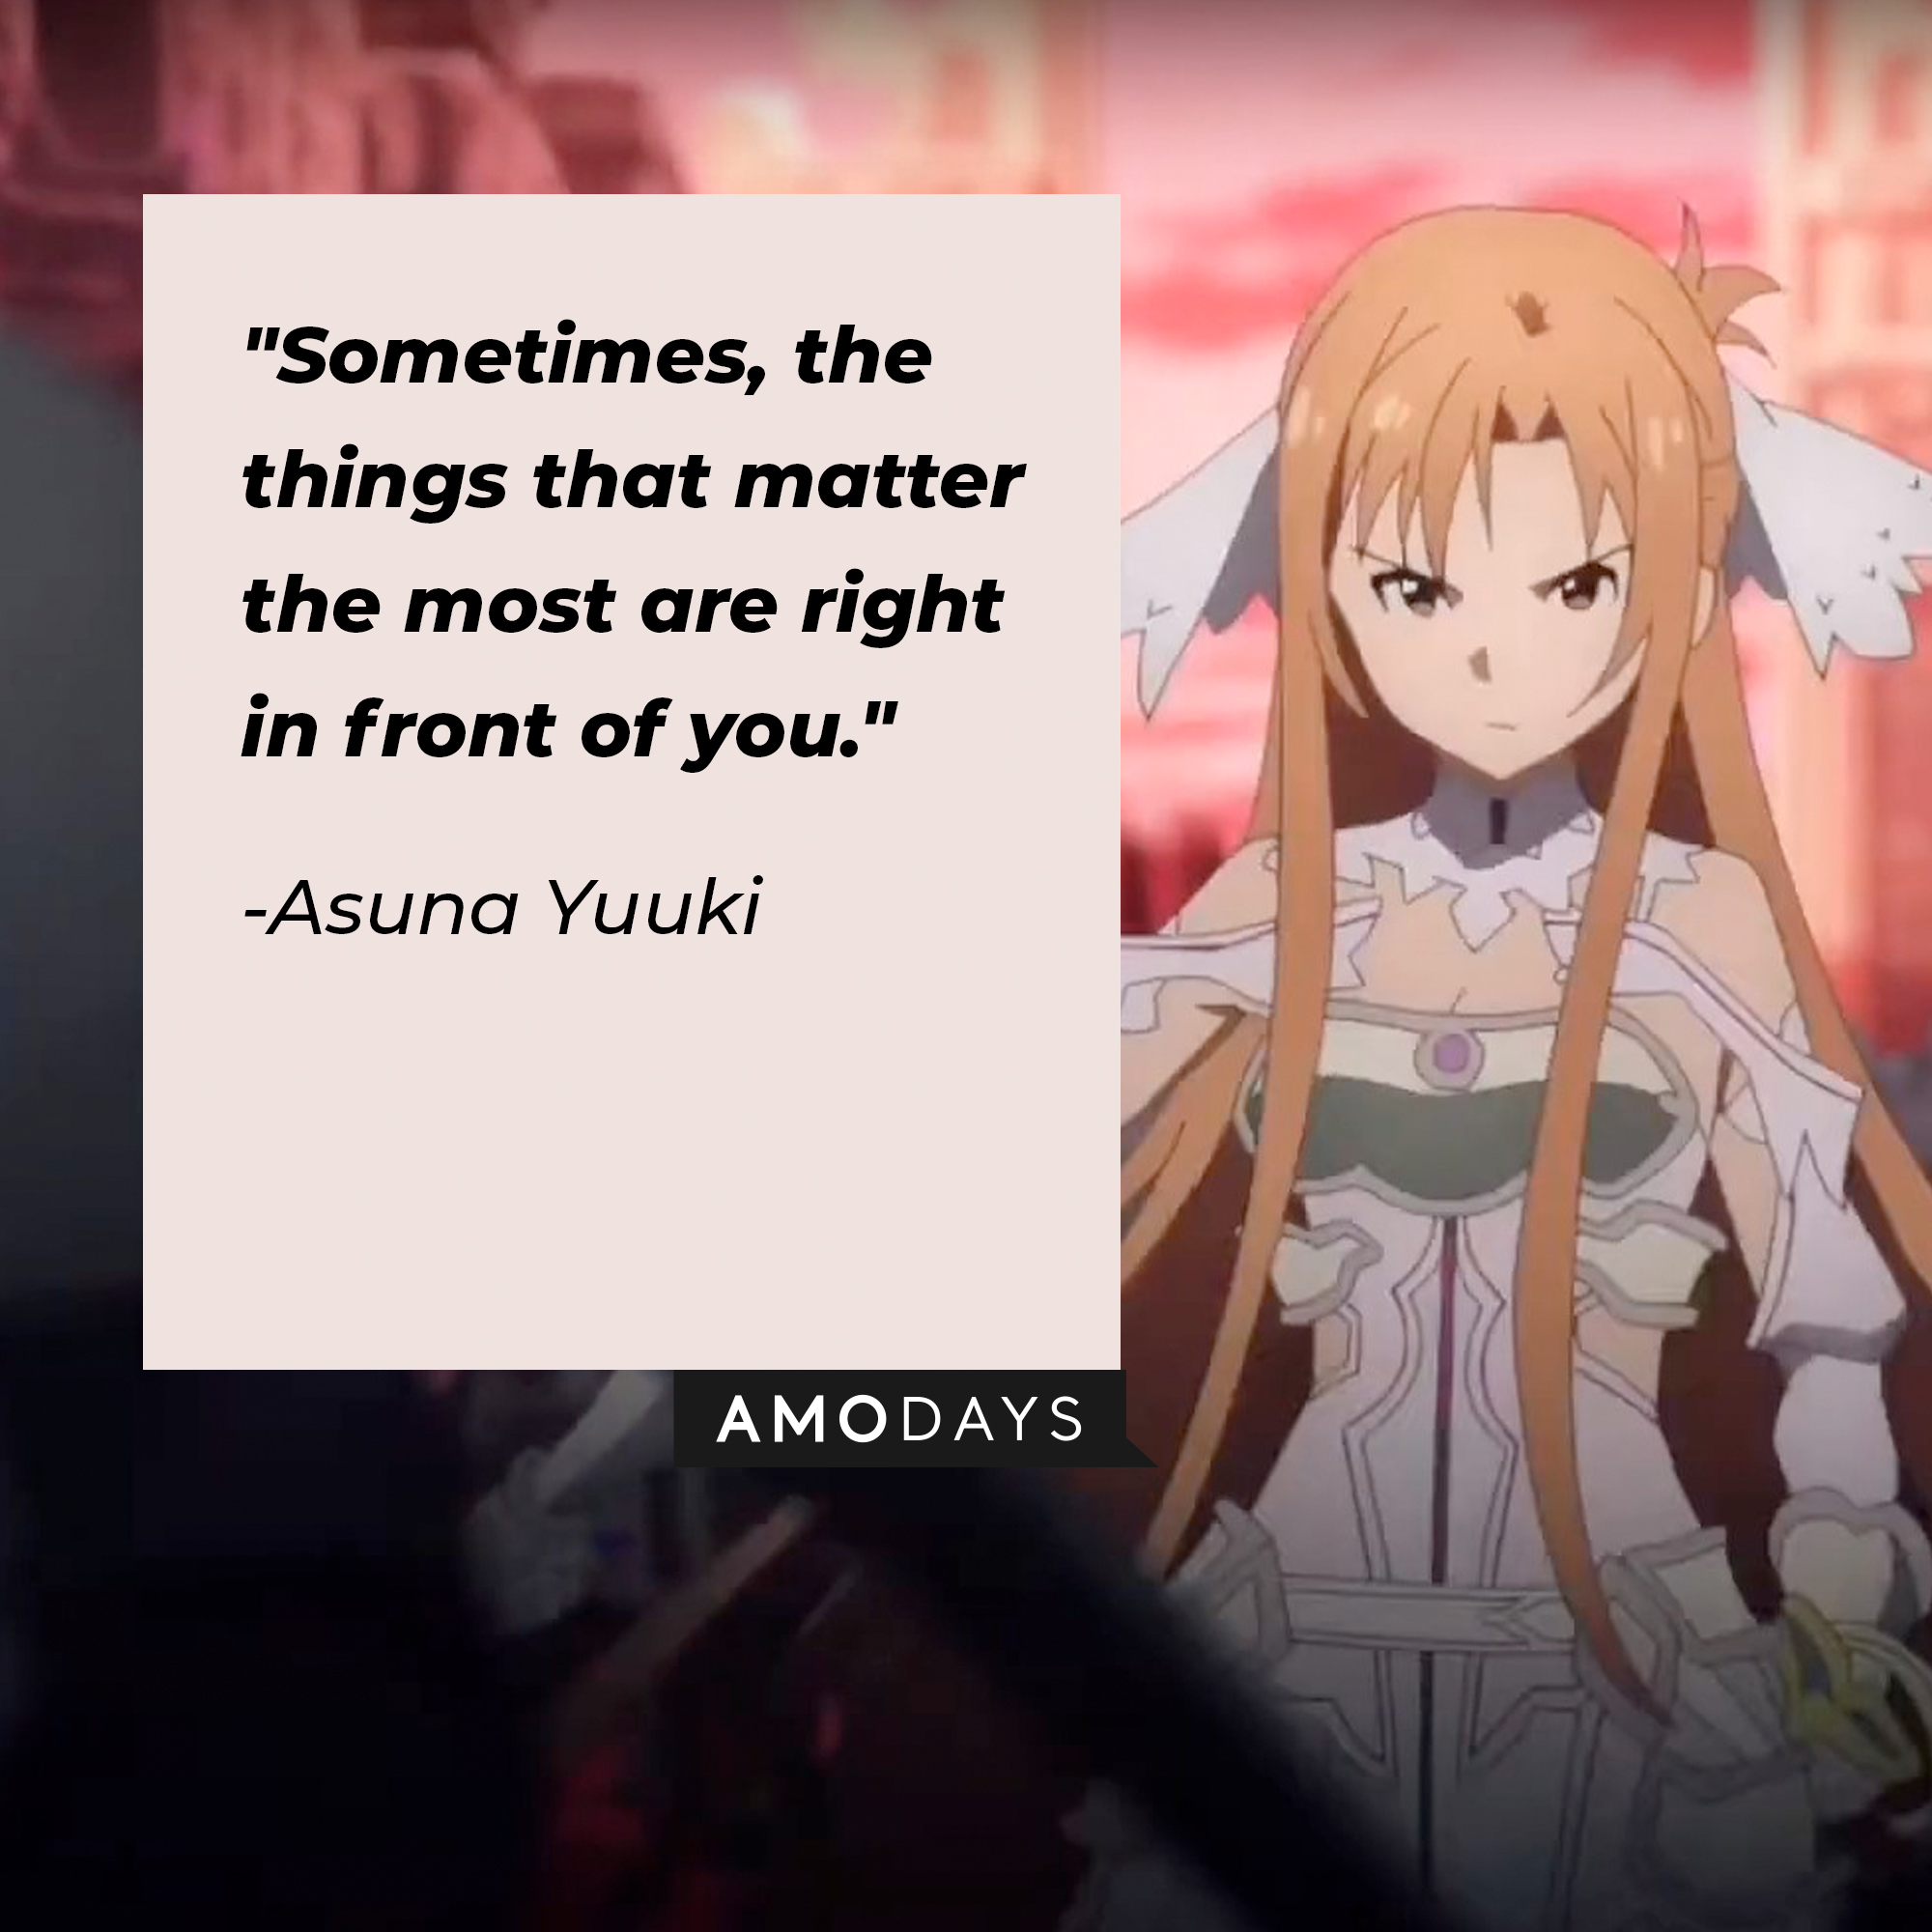 A picture of Asuna Yuuki with her quote: "Sometimes, the things that matter the most are right in front of you." | Source: facebook.com/SwordArtOnlineUSA